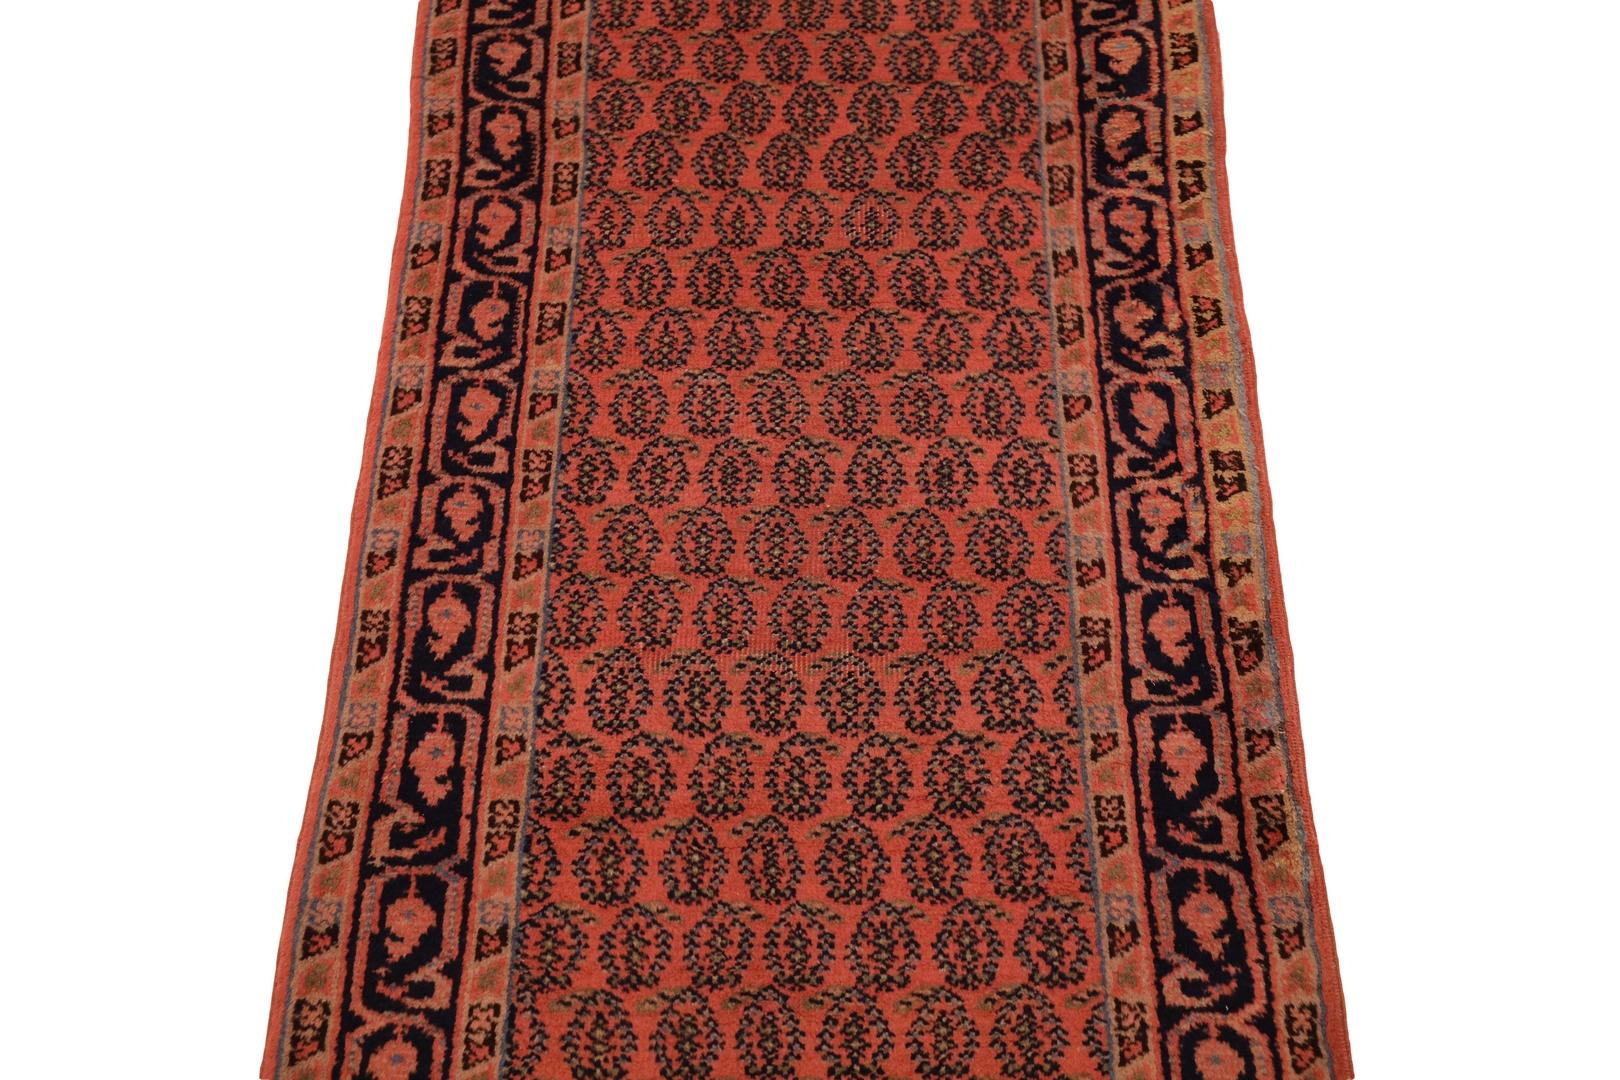 Hand-Knotted Sparta Semi-Antique Runner - 2'6